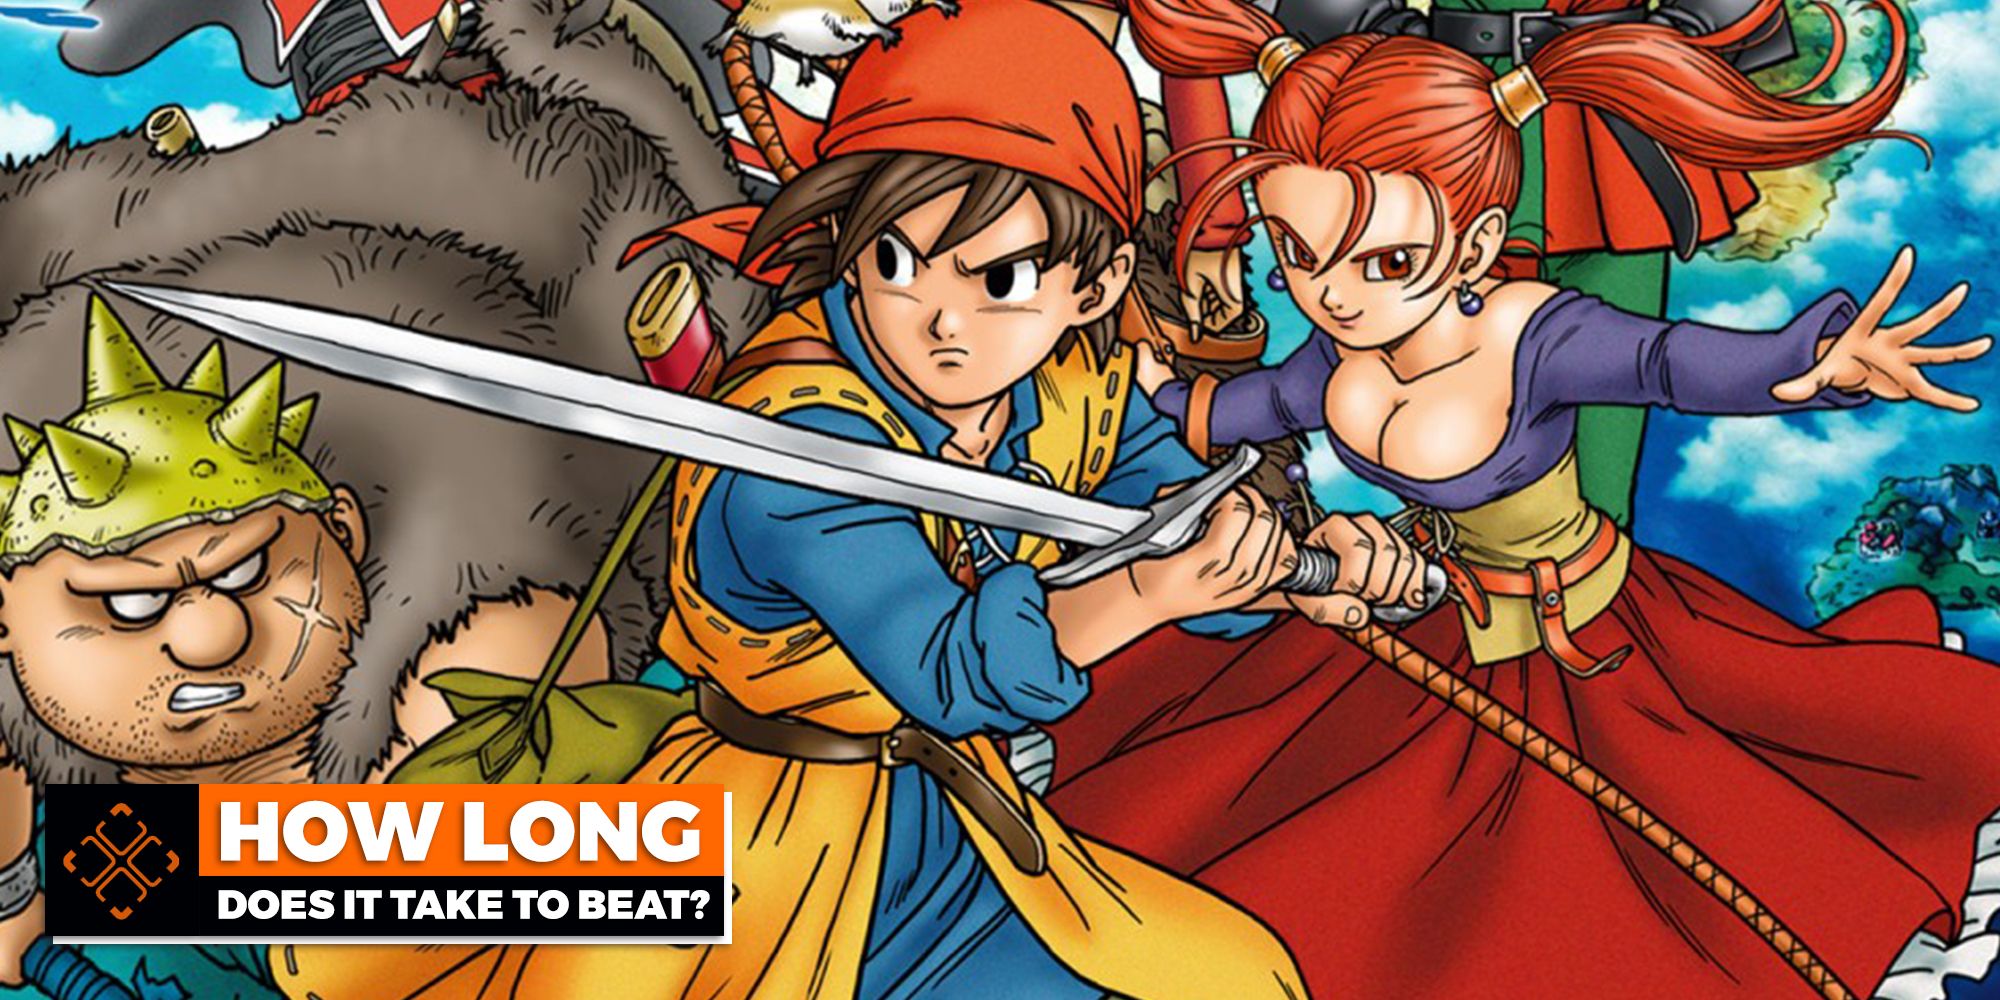 How Long Does It Take To Beat Dragon Quest 8